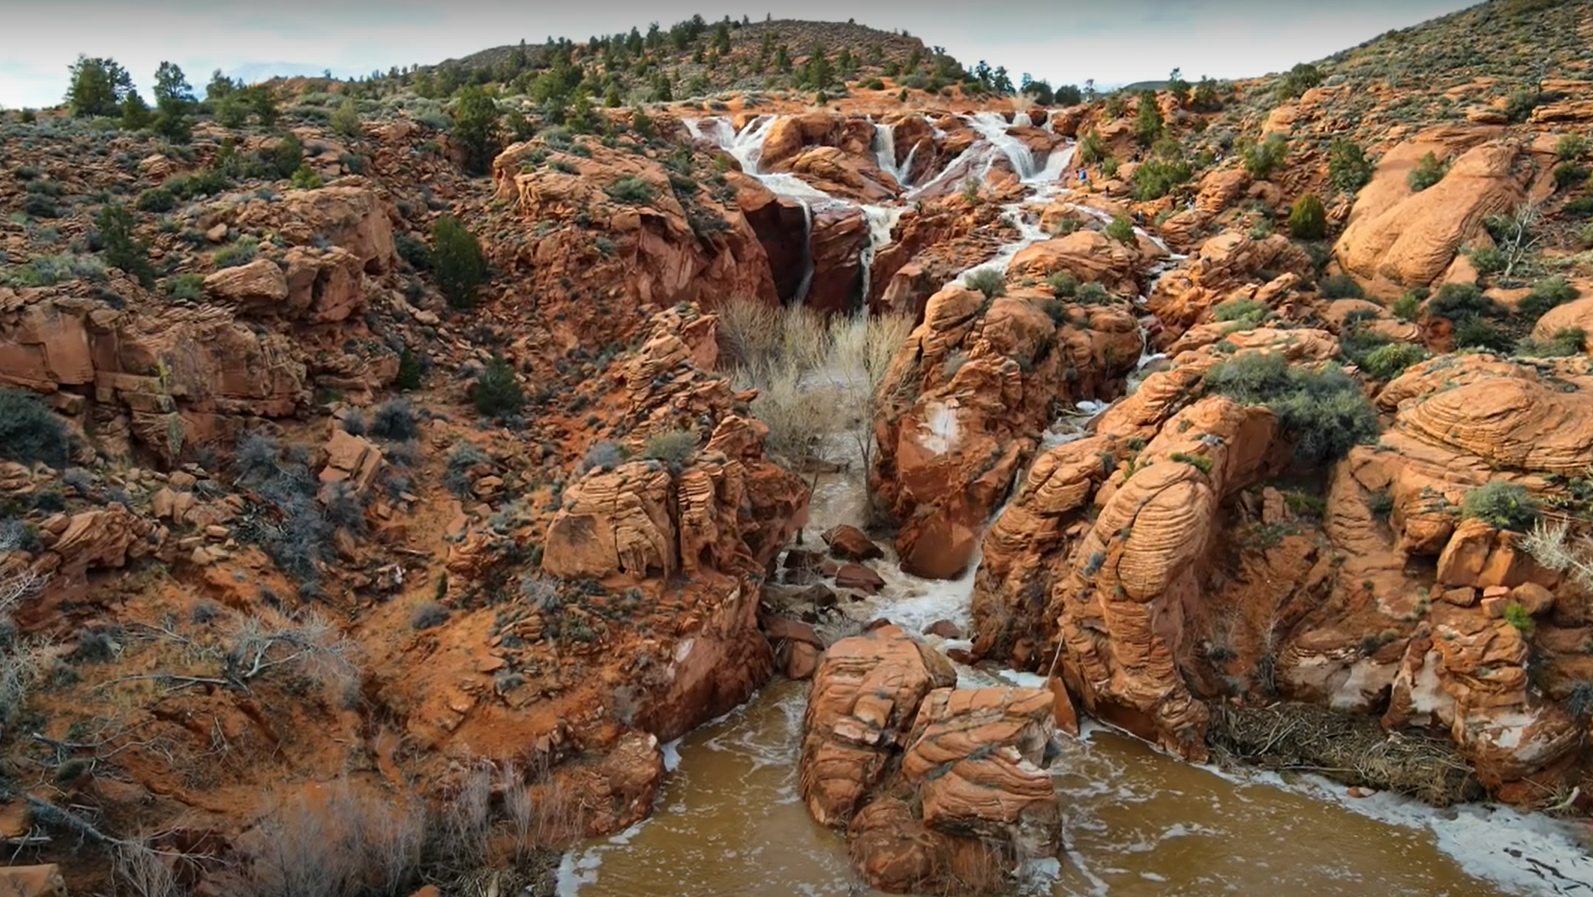 Two people were rescued on Saturday at Gunlock Falls near St. George, Utah. The first was a man in ...